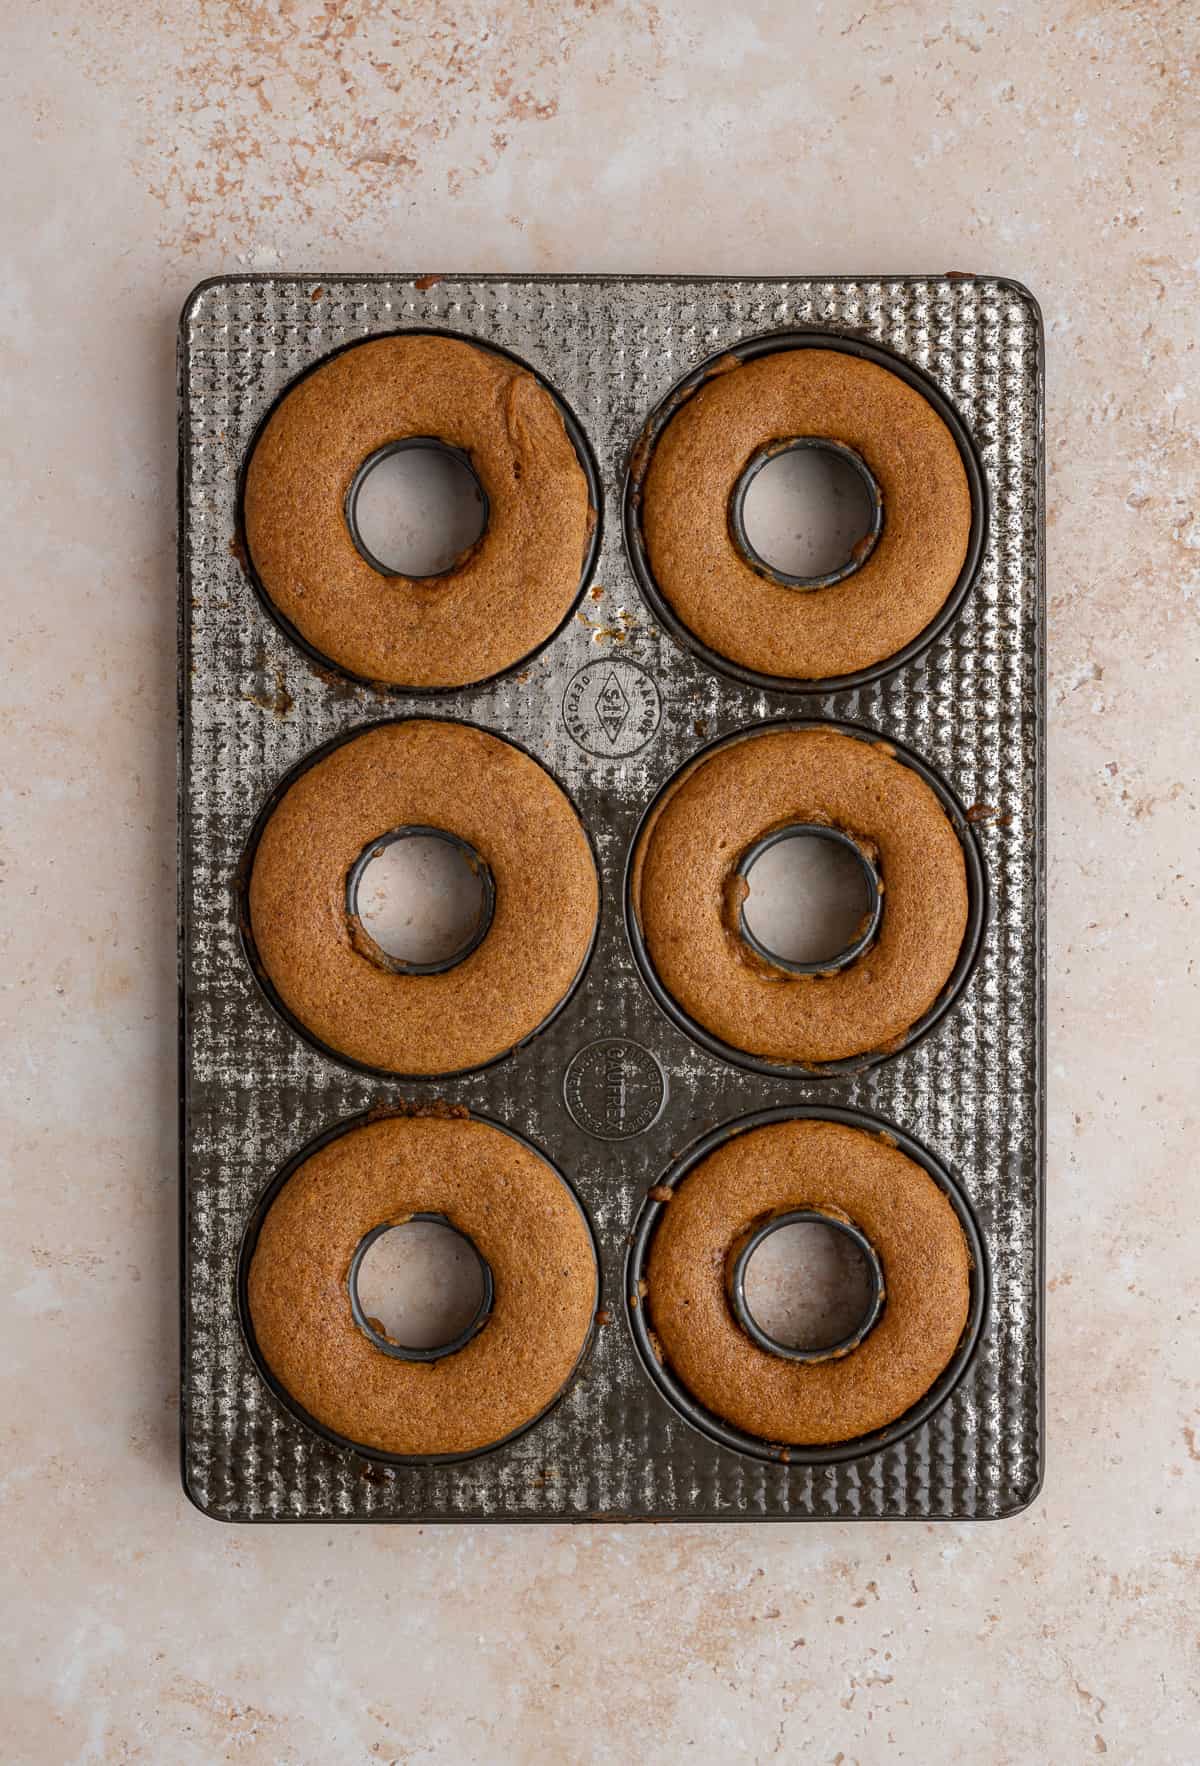 baked apple cider donuts in an antique donut pan.